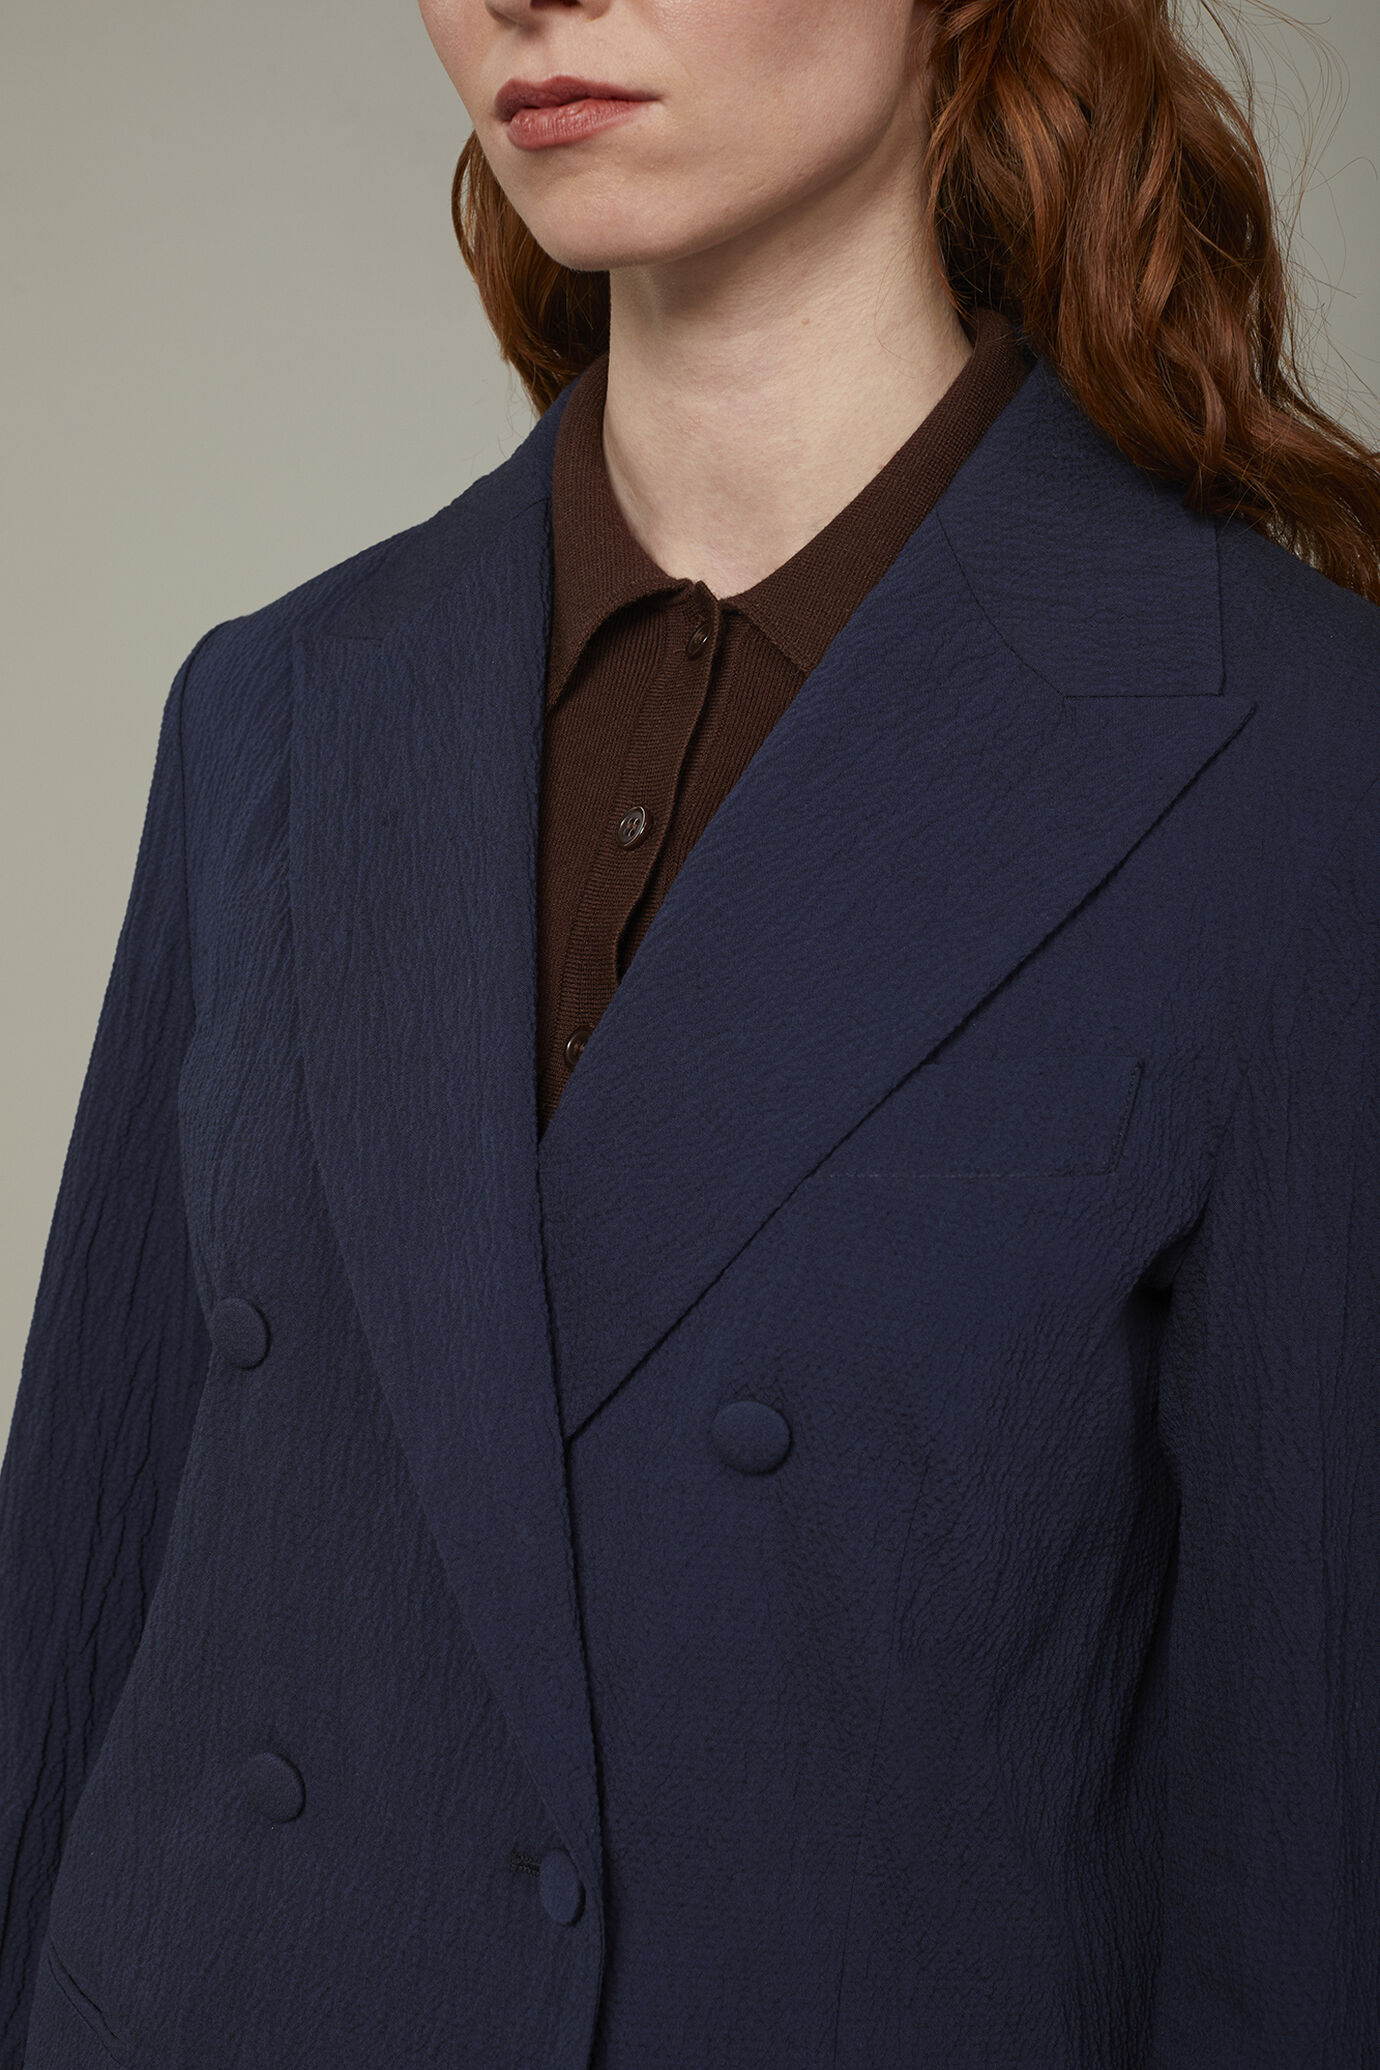 Women’s double-breasted blazer regular fit image number 3